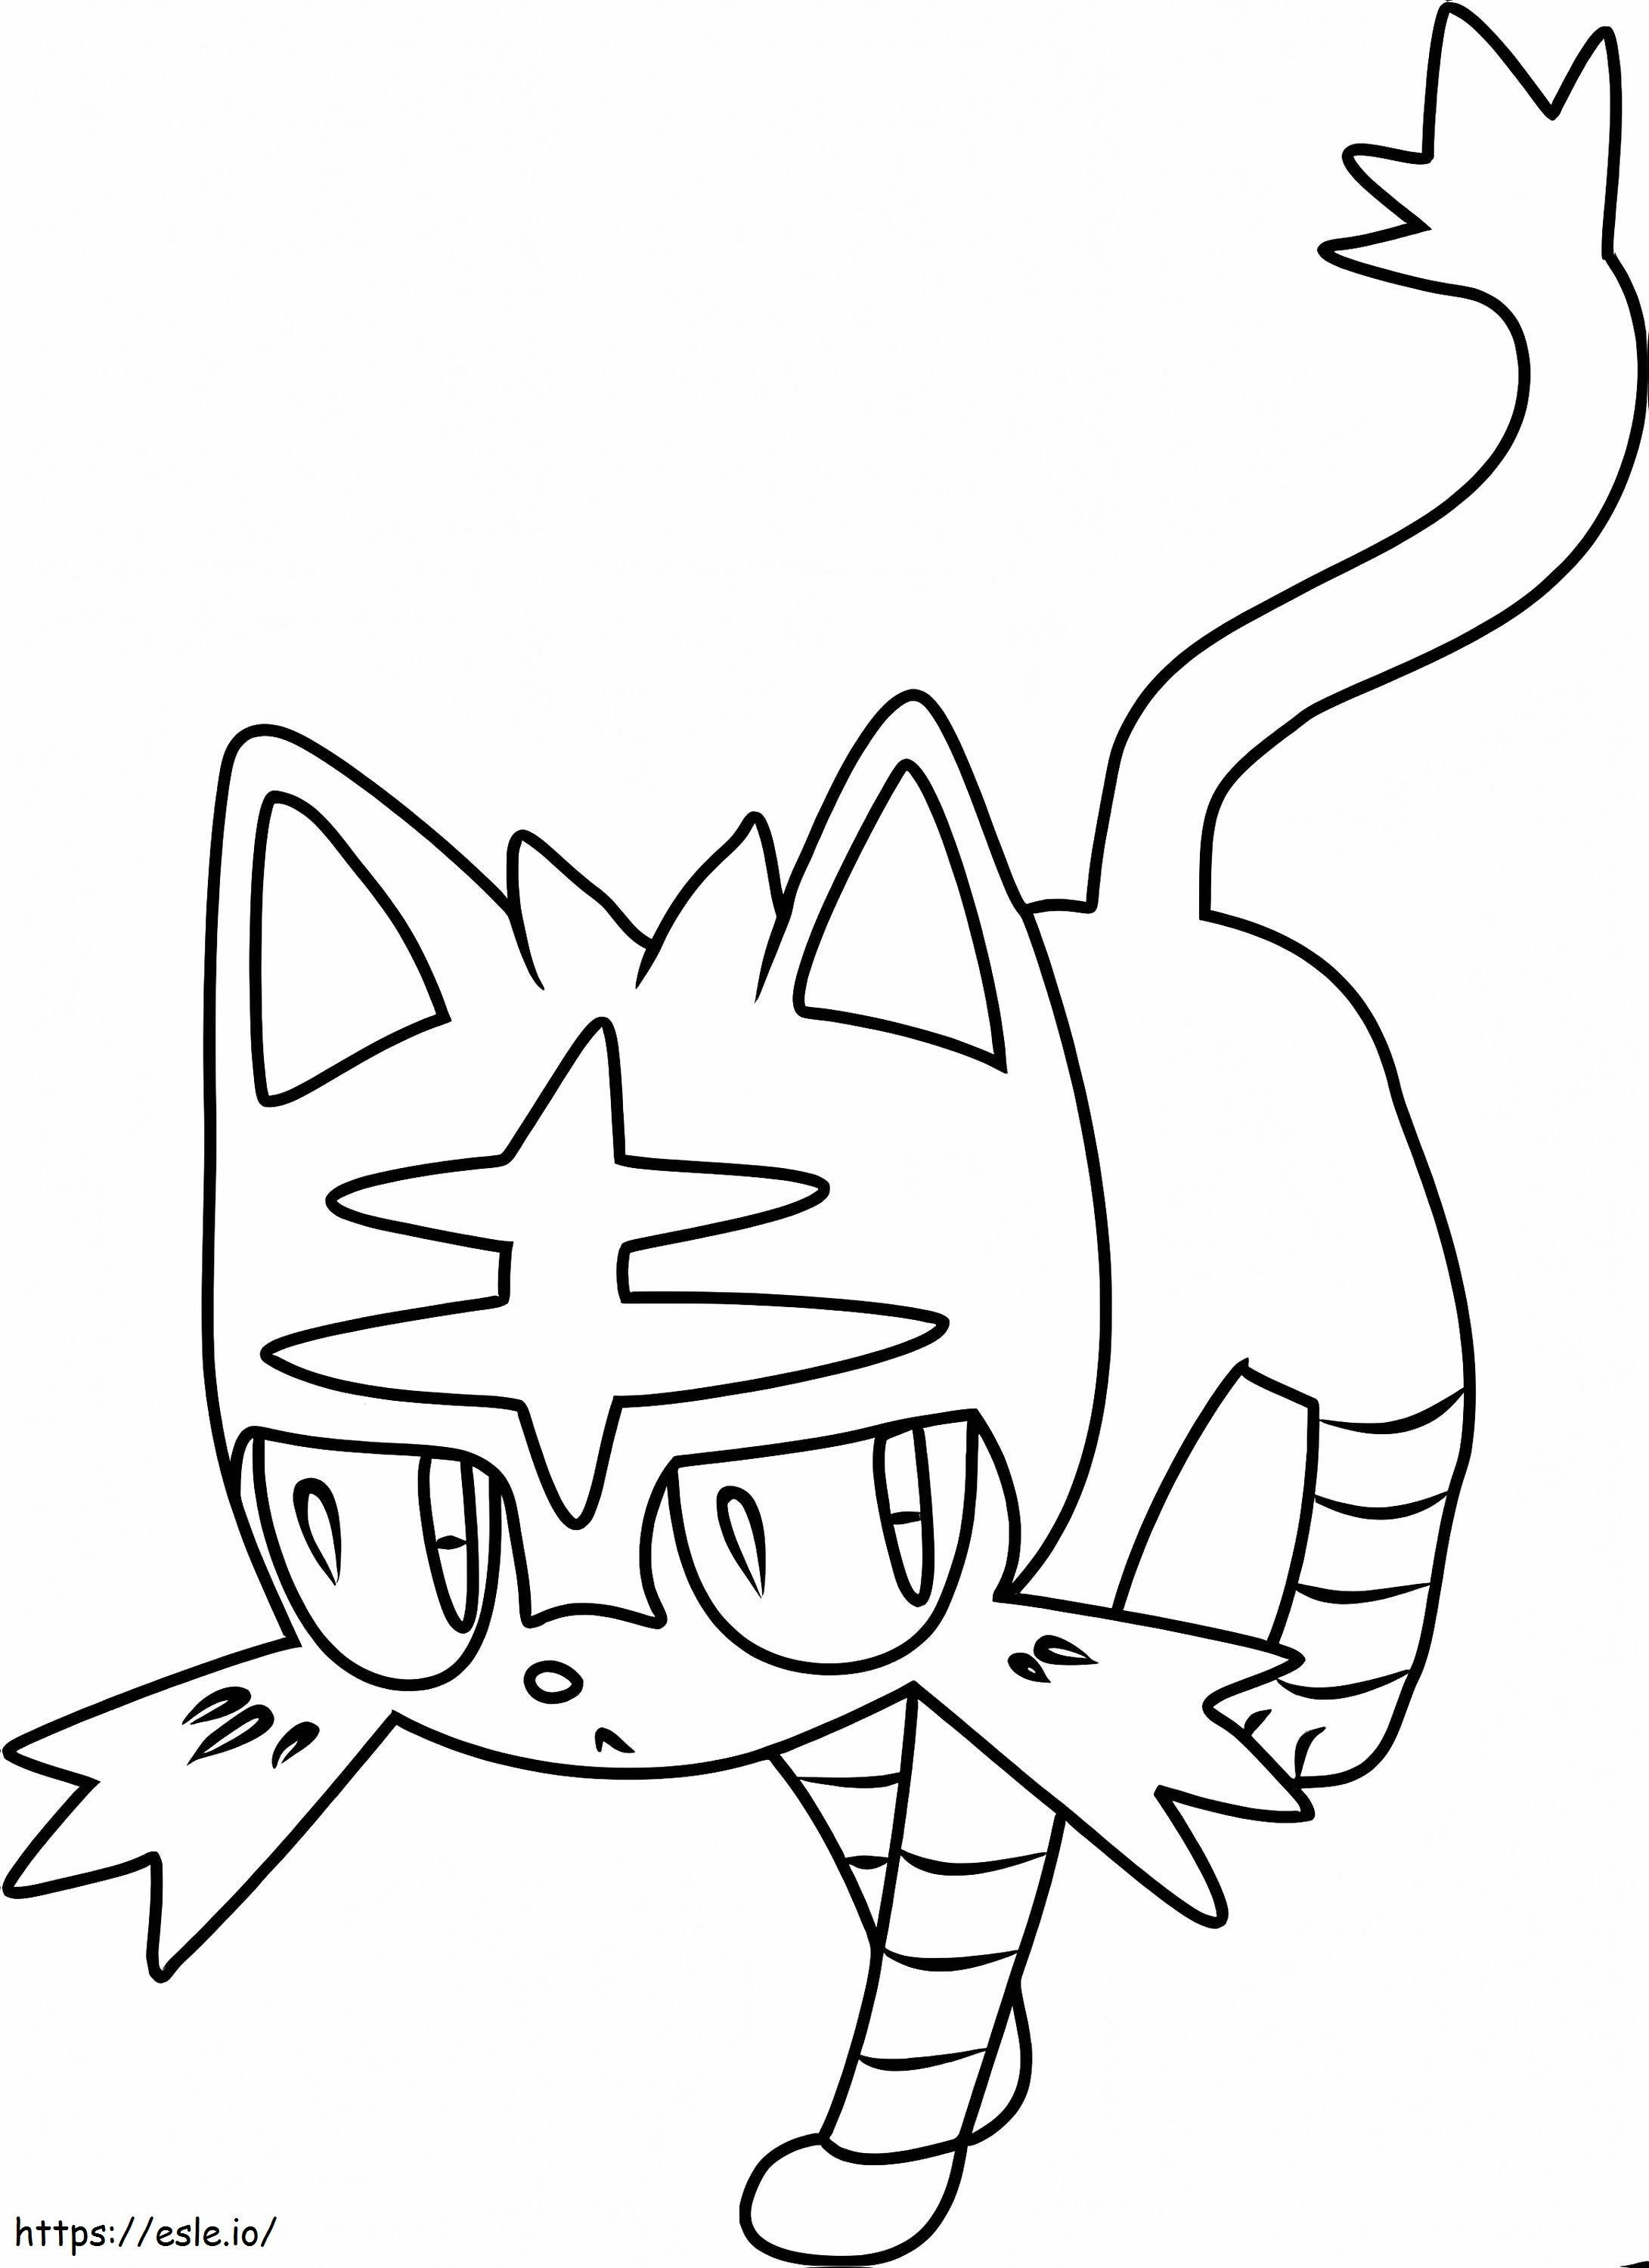 Leave 2 coloring page